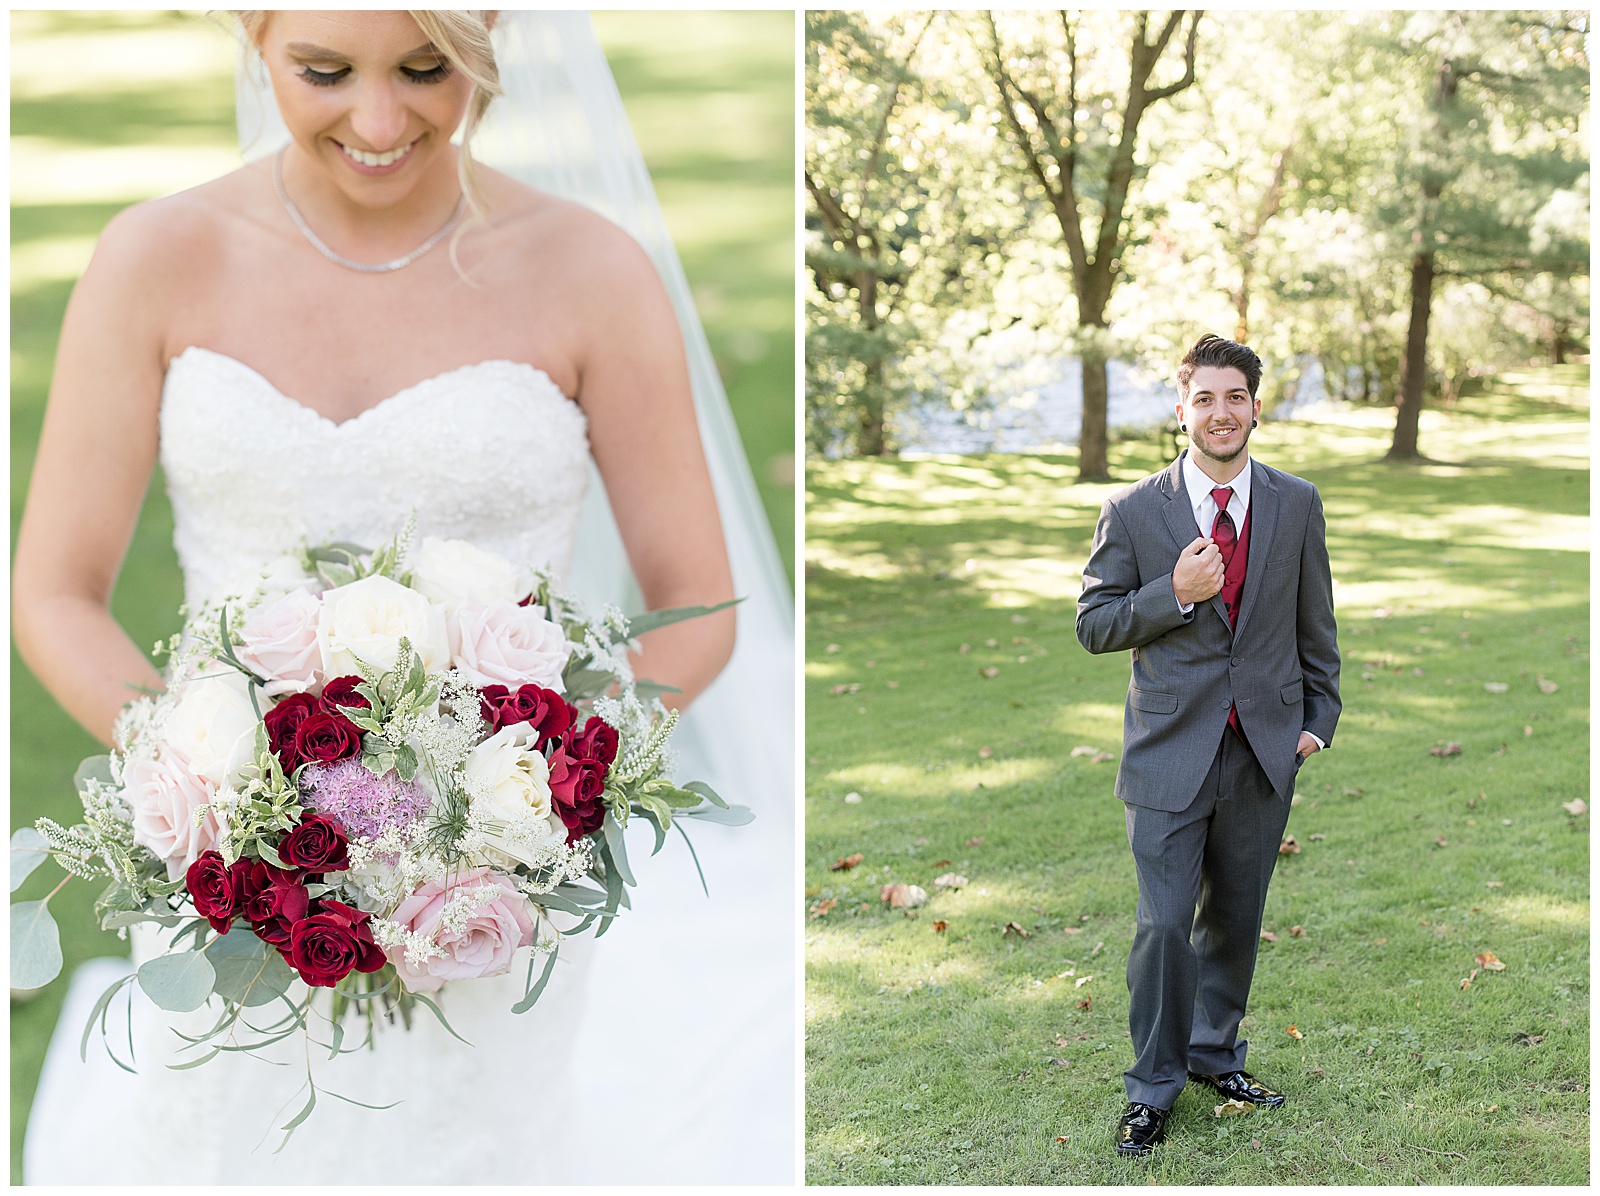 close up of bride looking down and smiling at her beautiful bouquet of white and maroon flowers and eucalyptus with grass behind her at Riverdale Manor in Lancaster, PA, groom is standing in center of photo looking at camera with left hand in pocket and right hand holding edge of his suit coat near his dark red tie and smiling with his right foot extended slightly forward with grass around him and trees and sunshine peaking through the trees behind him at Riverdale Manor in Lancaster, PA